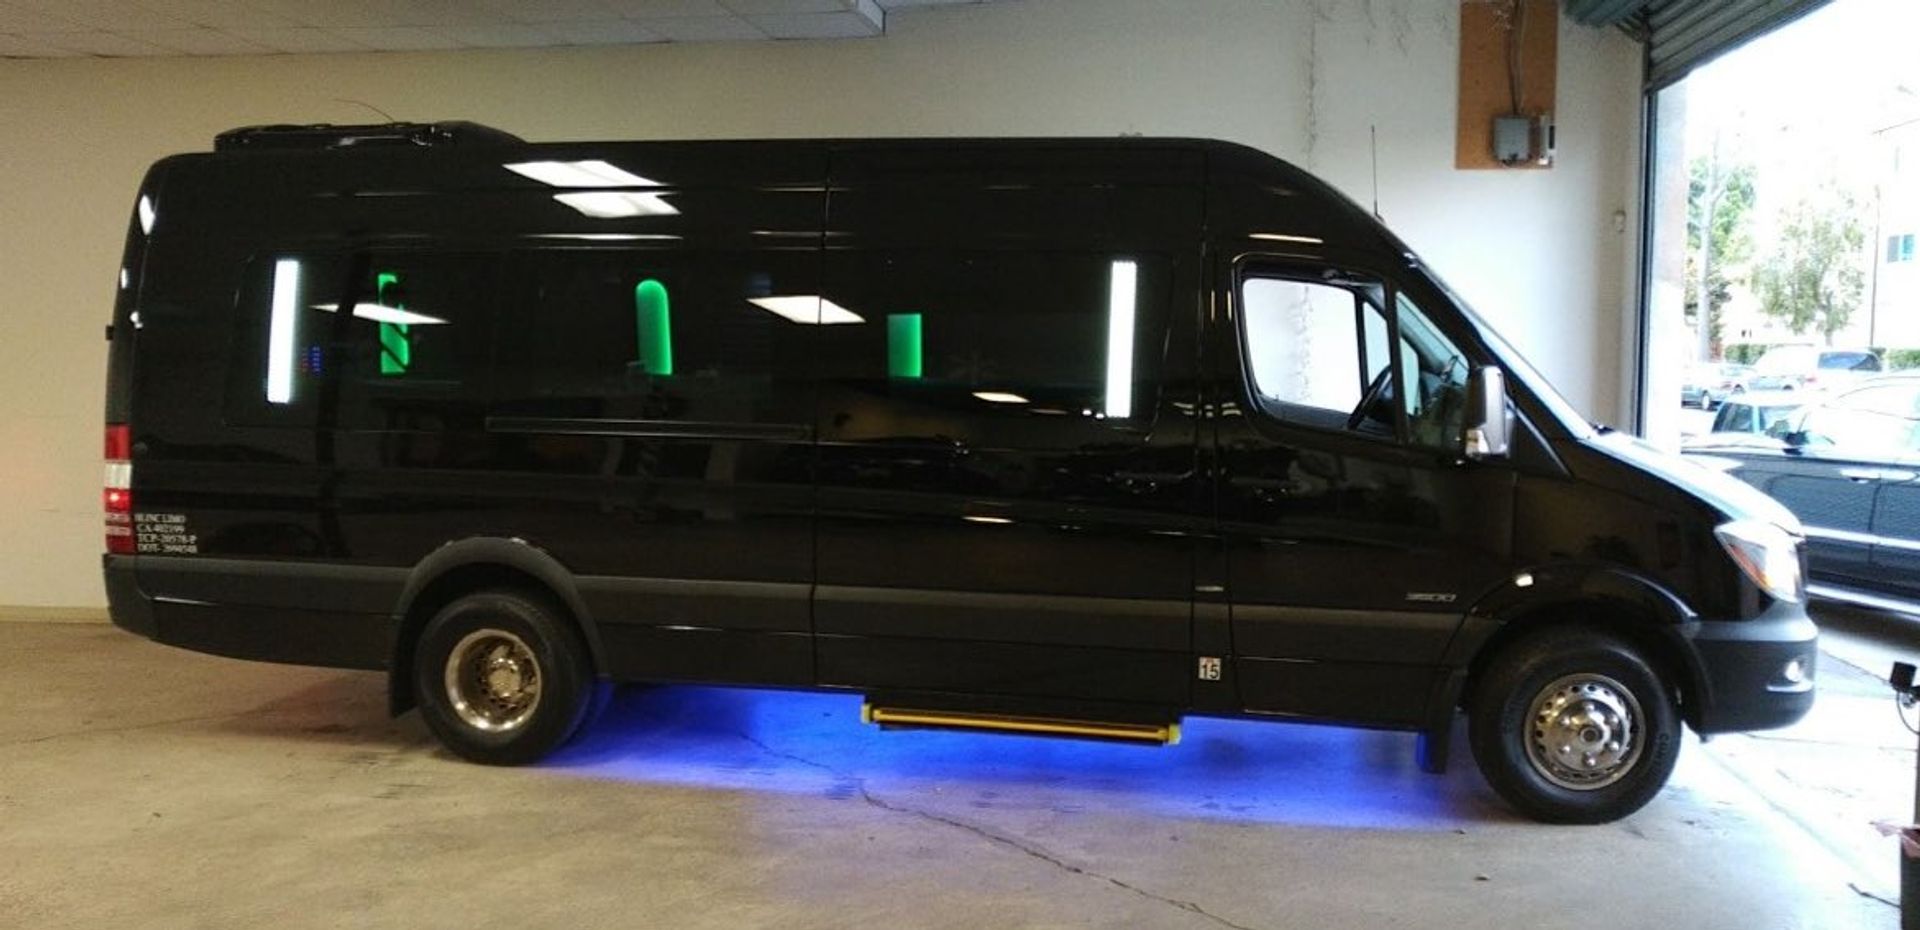 Ultimate Party Sprinter: Multi-Day Transportation & Optional Airport Pickup/Drop-Off with LUX CLS (Up to 14 People) image 1